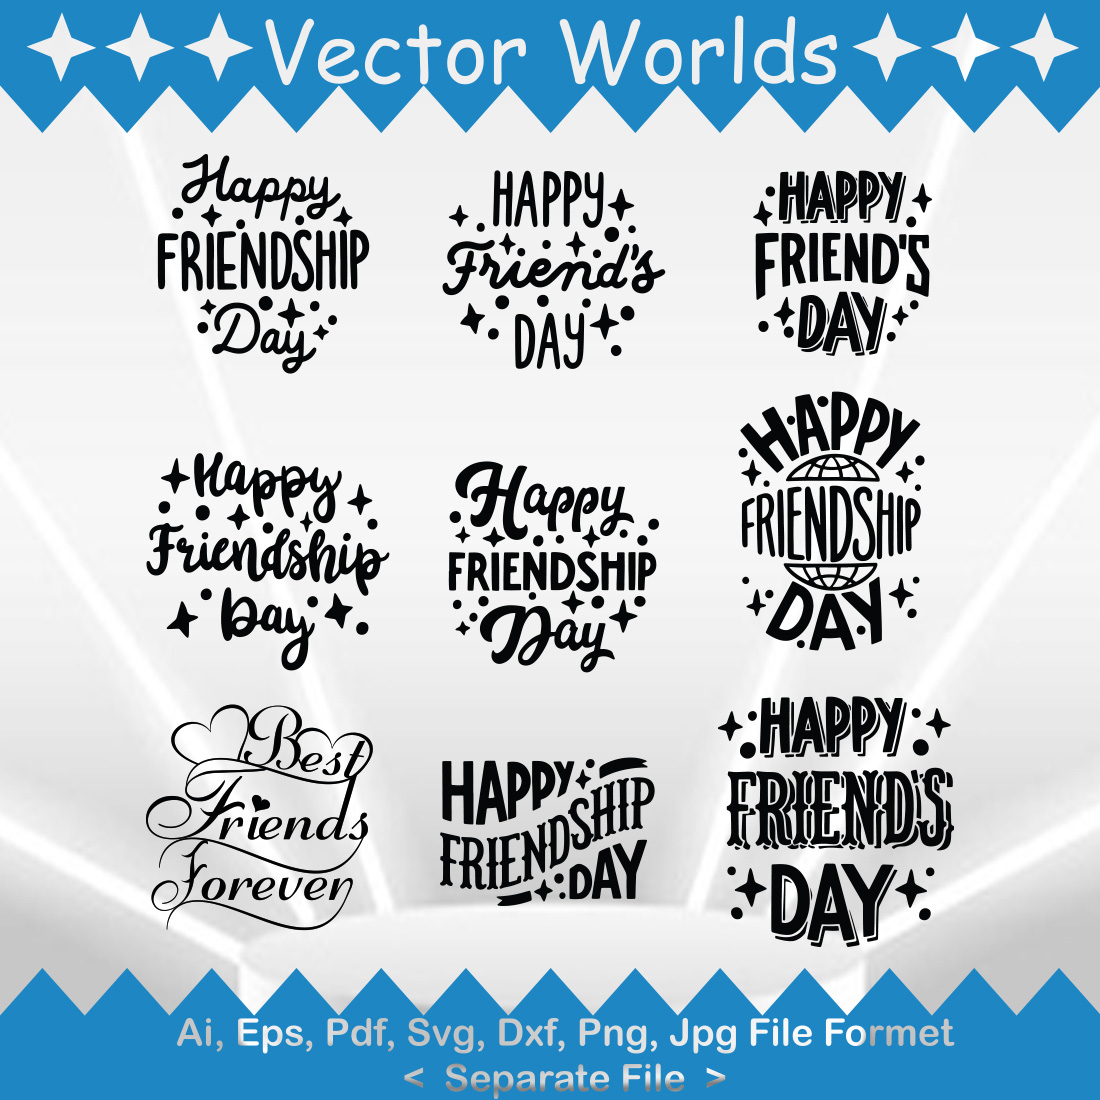 Happy Friendship Day SVG Vector Design cover image.